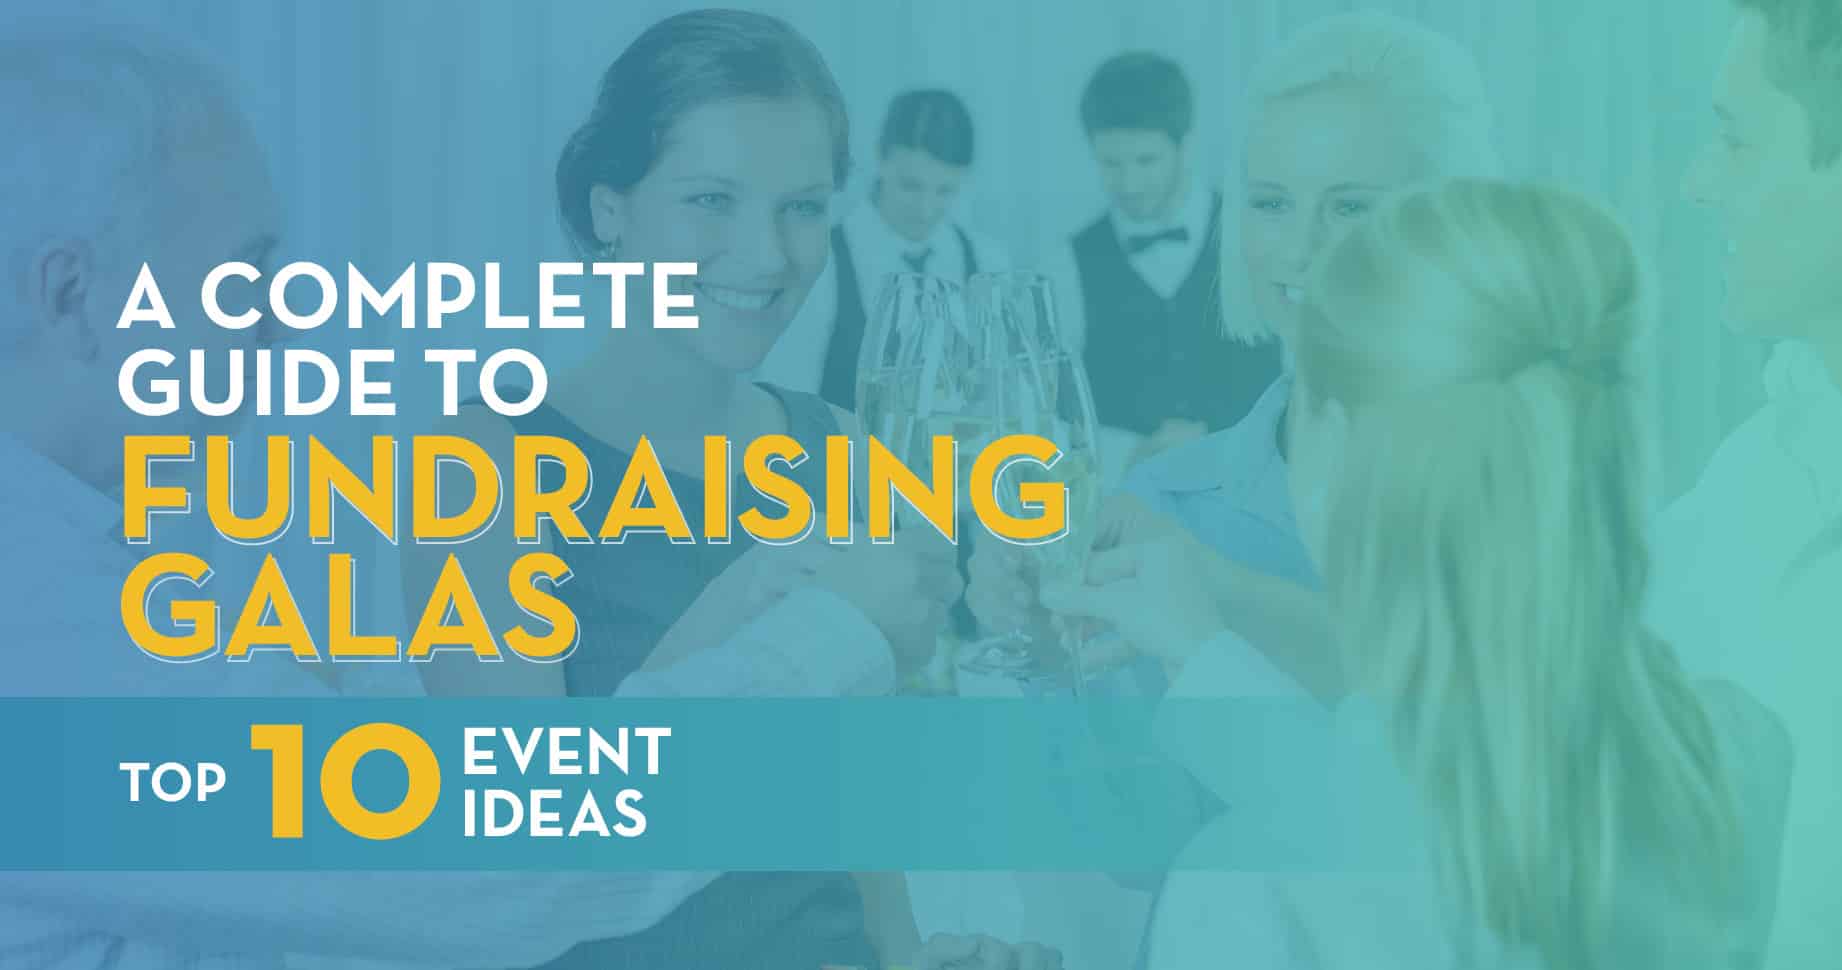 A fundraising gala can help your nonprofit build stronger donor relationships and drive revenue.